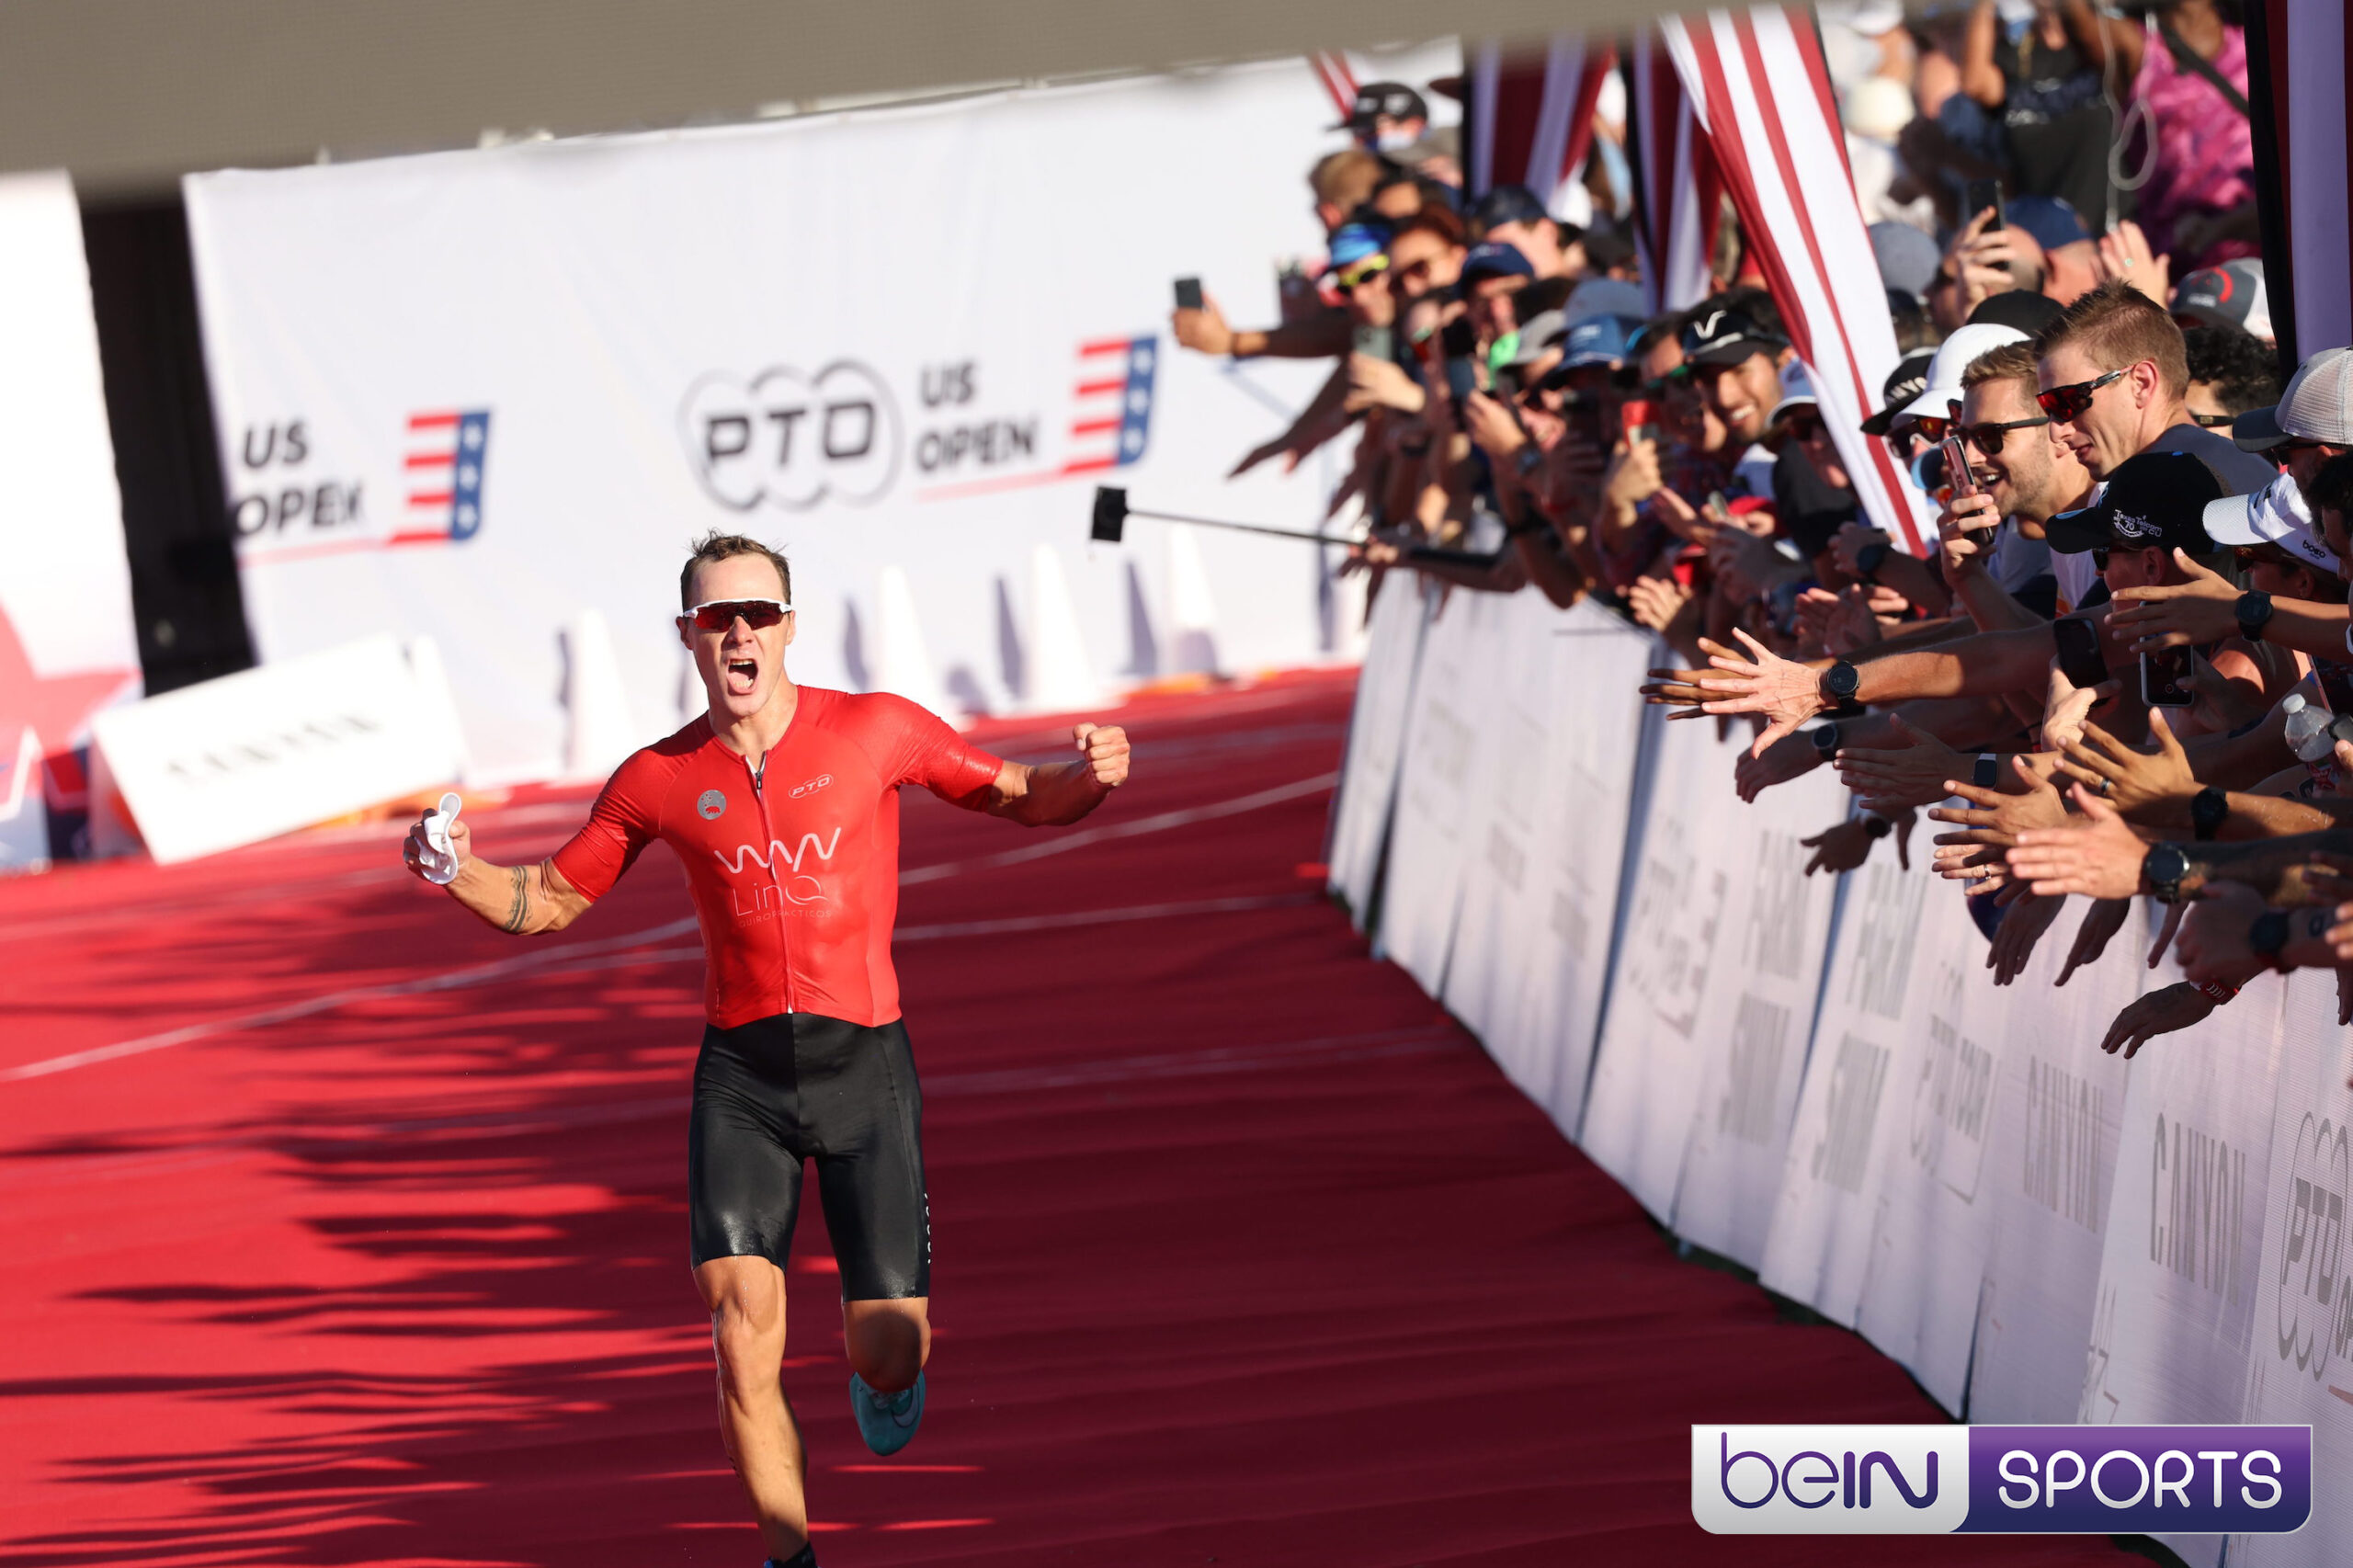 PROFESSIONAL TRIATHLETES ORGANISATION RENEWS PTO TOUR DEAL WITH beIN SPORTS ACROSS 36 COUNTRIES